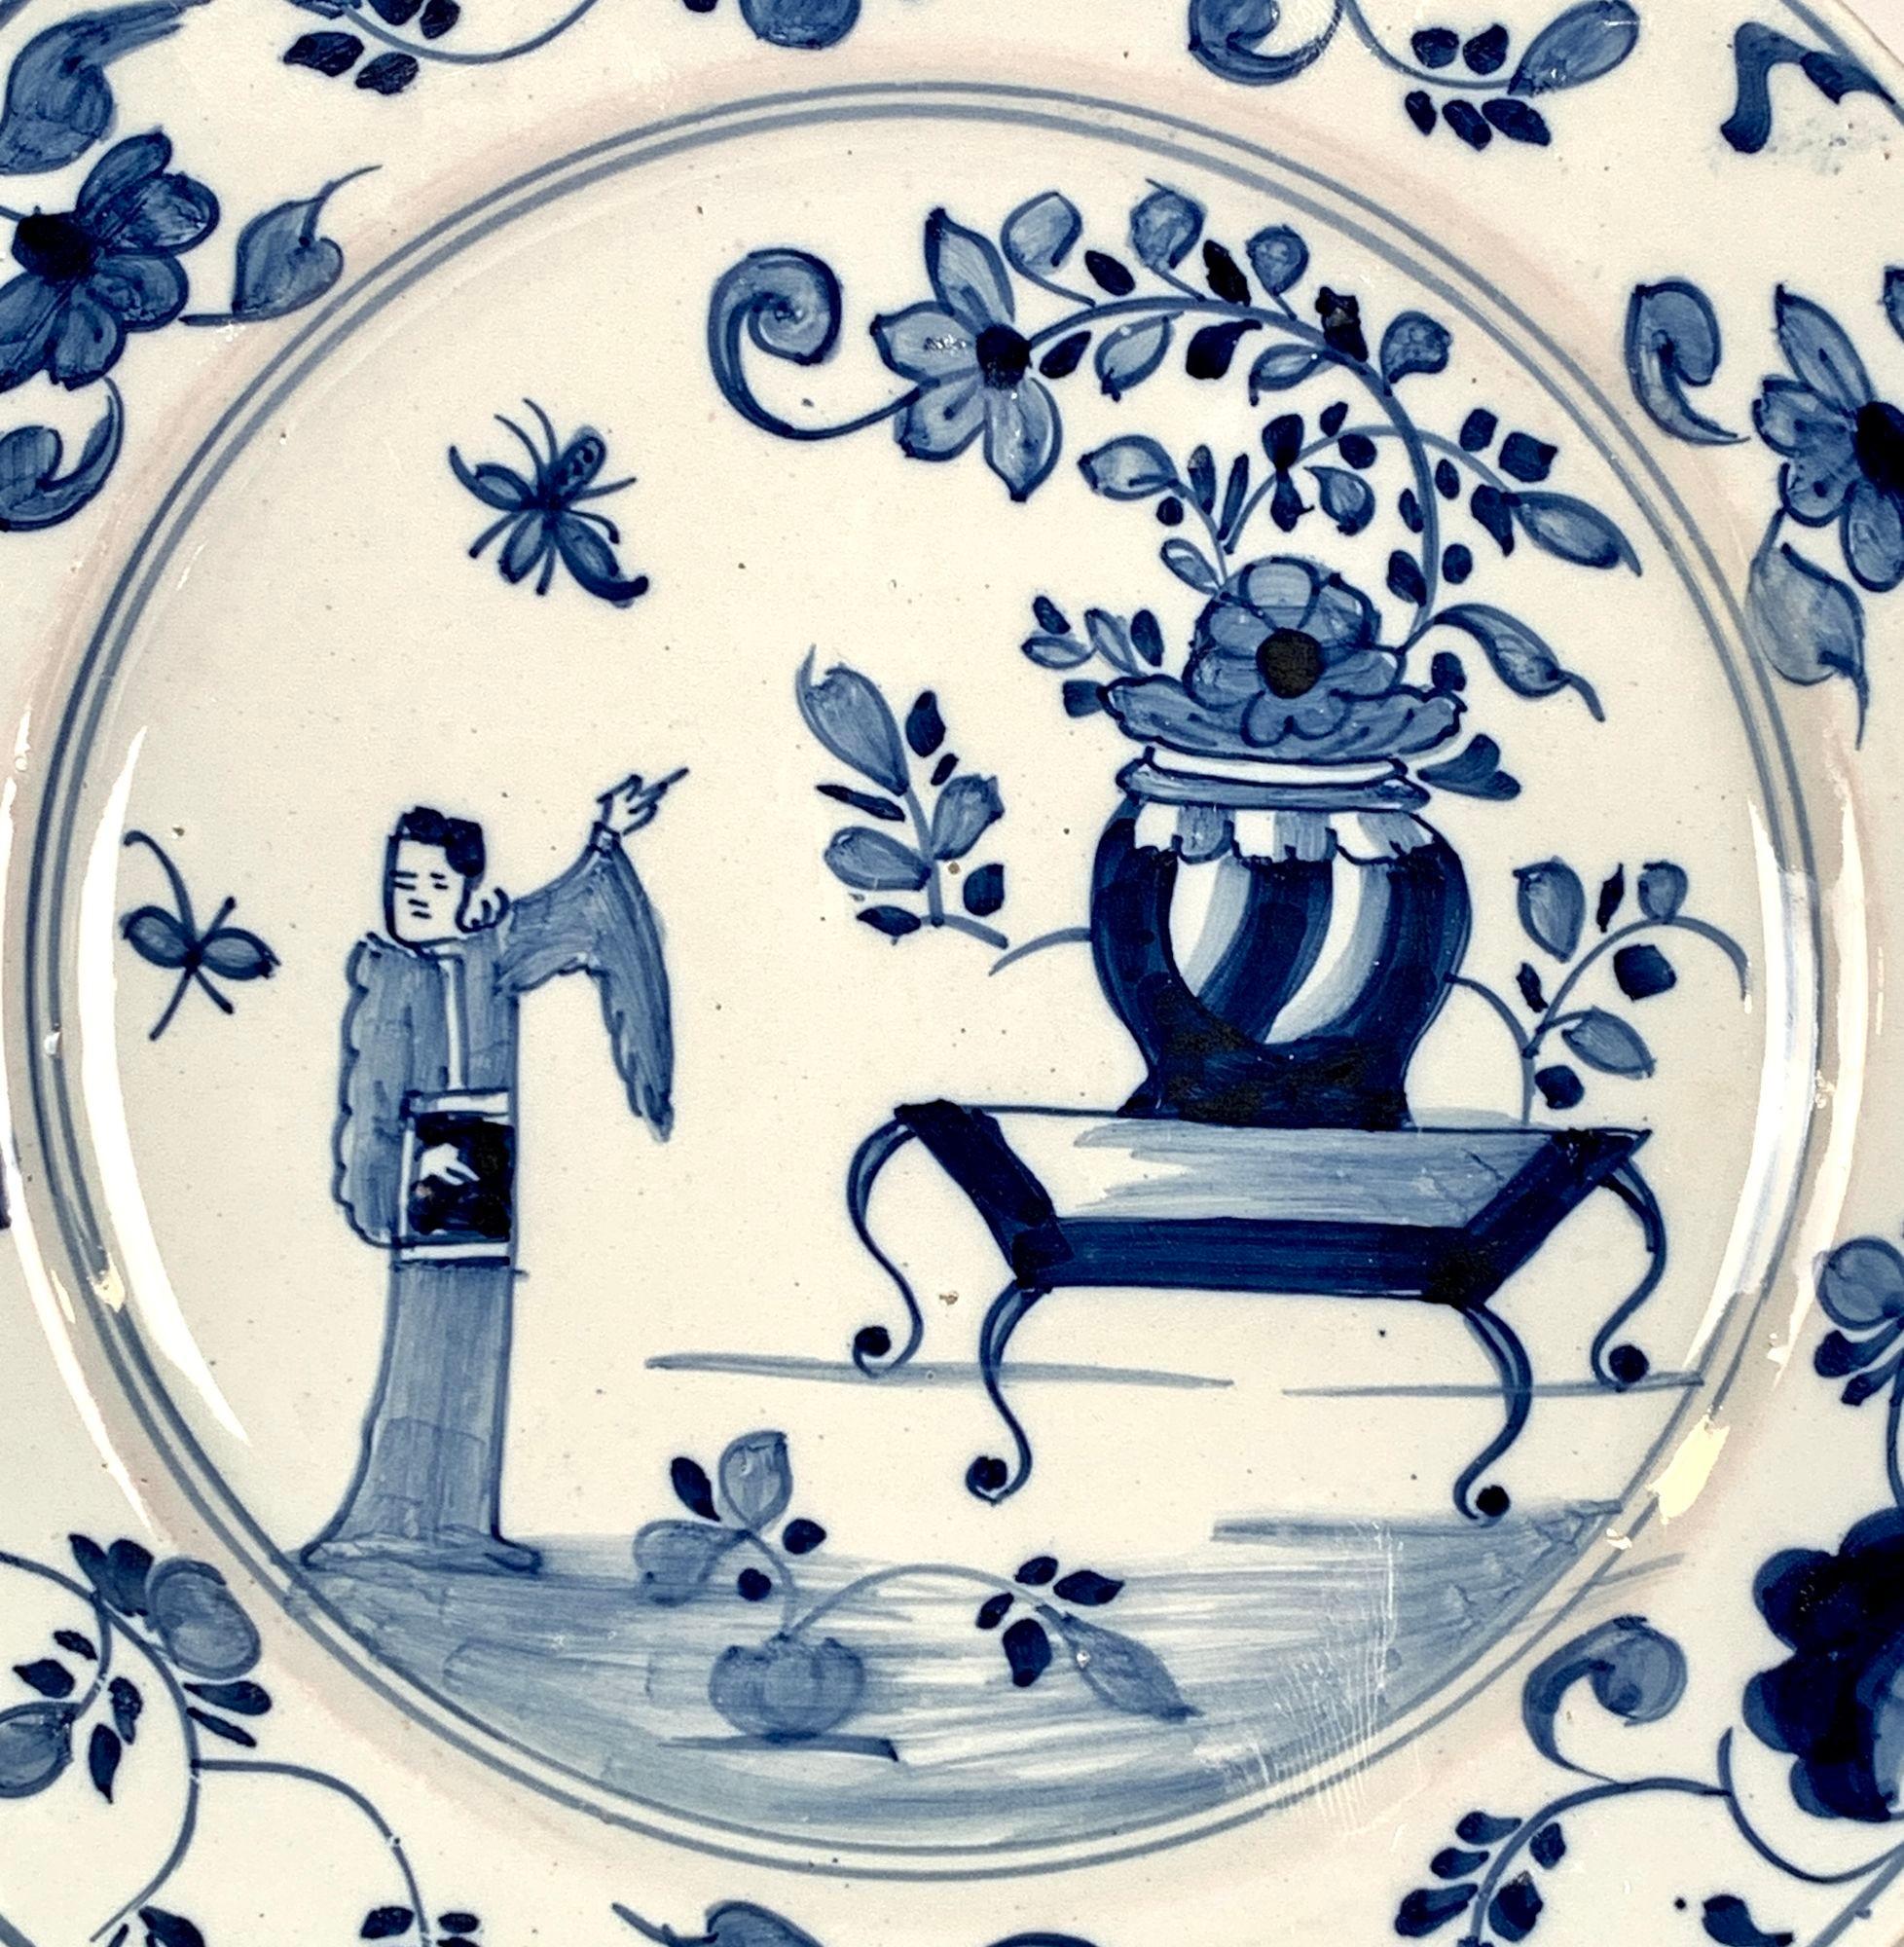 This stunning blue and white Delft dish was hand painted in England around 1760.
It features a charming chinoiserie scene, where an Oriental figure is pointing towards a vase while two butterflies flutter nearby.
It seems as though she is signaling